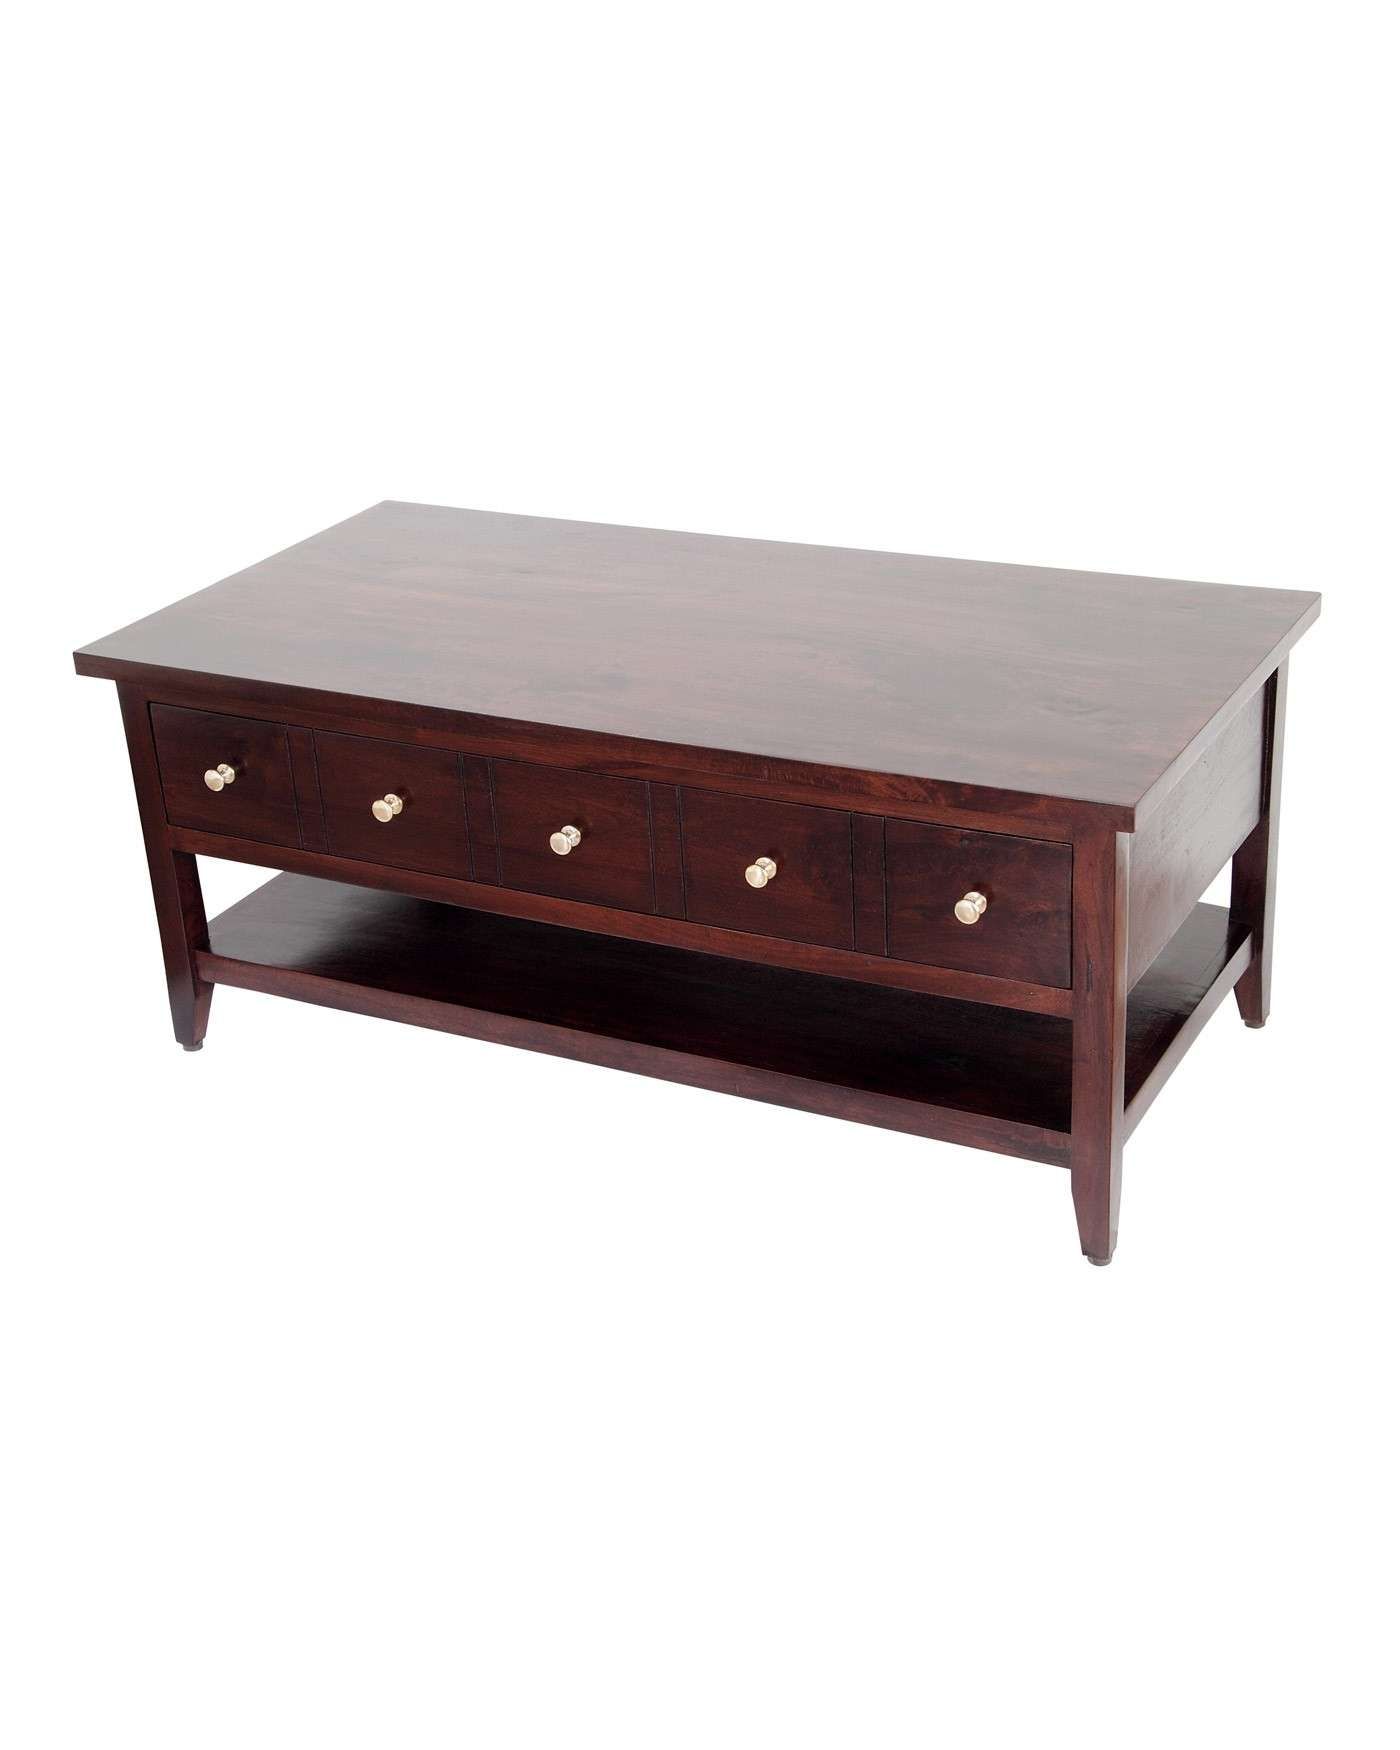 Coffee Tables : Coffee Table Dark Wood Weirs Sets With Storage Pertaining To Most Popular Dark Coffee Tables (Gallery 20 of 20)